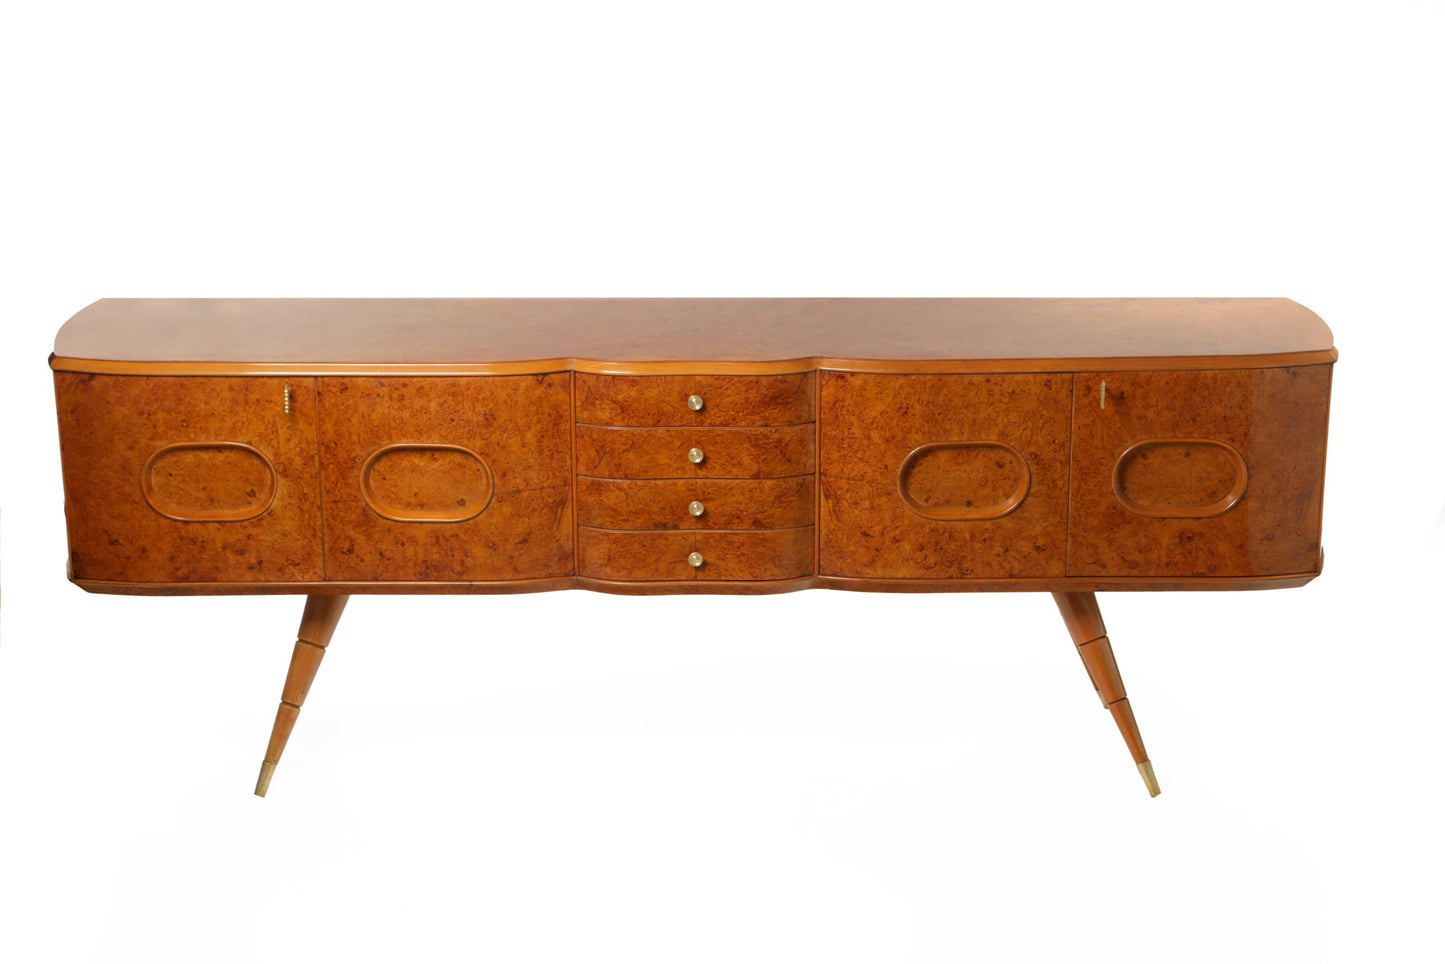 Fratelli Marelli sideboard from the 1940s